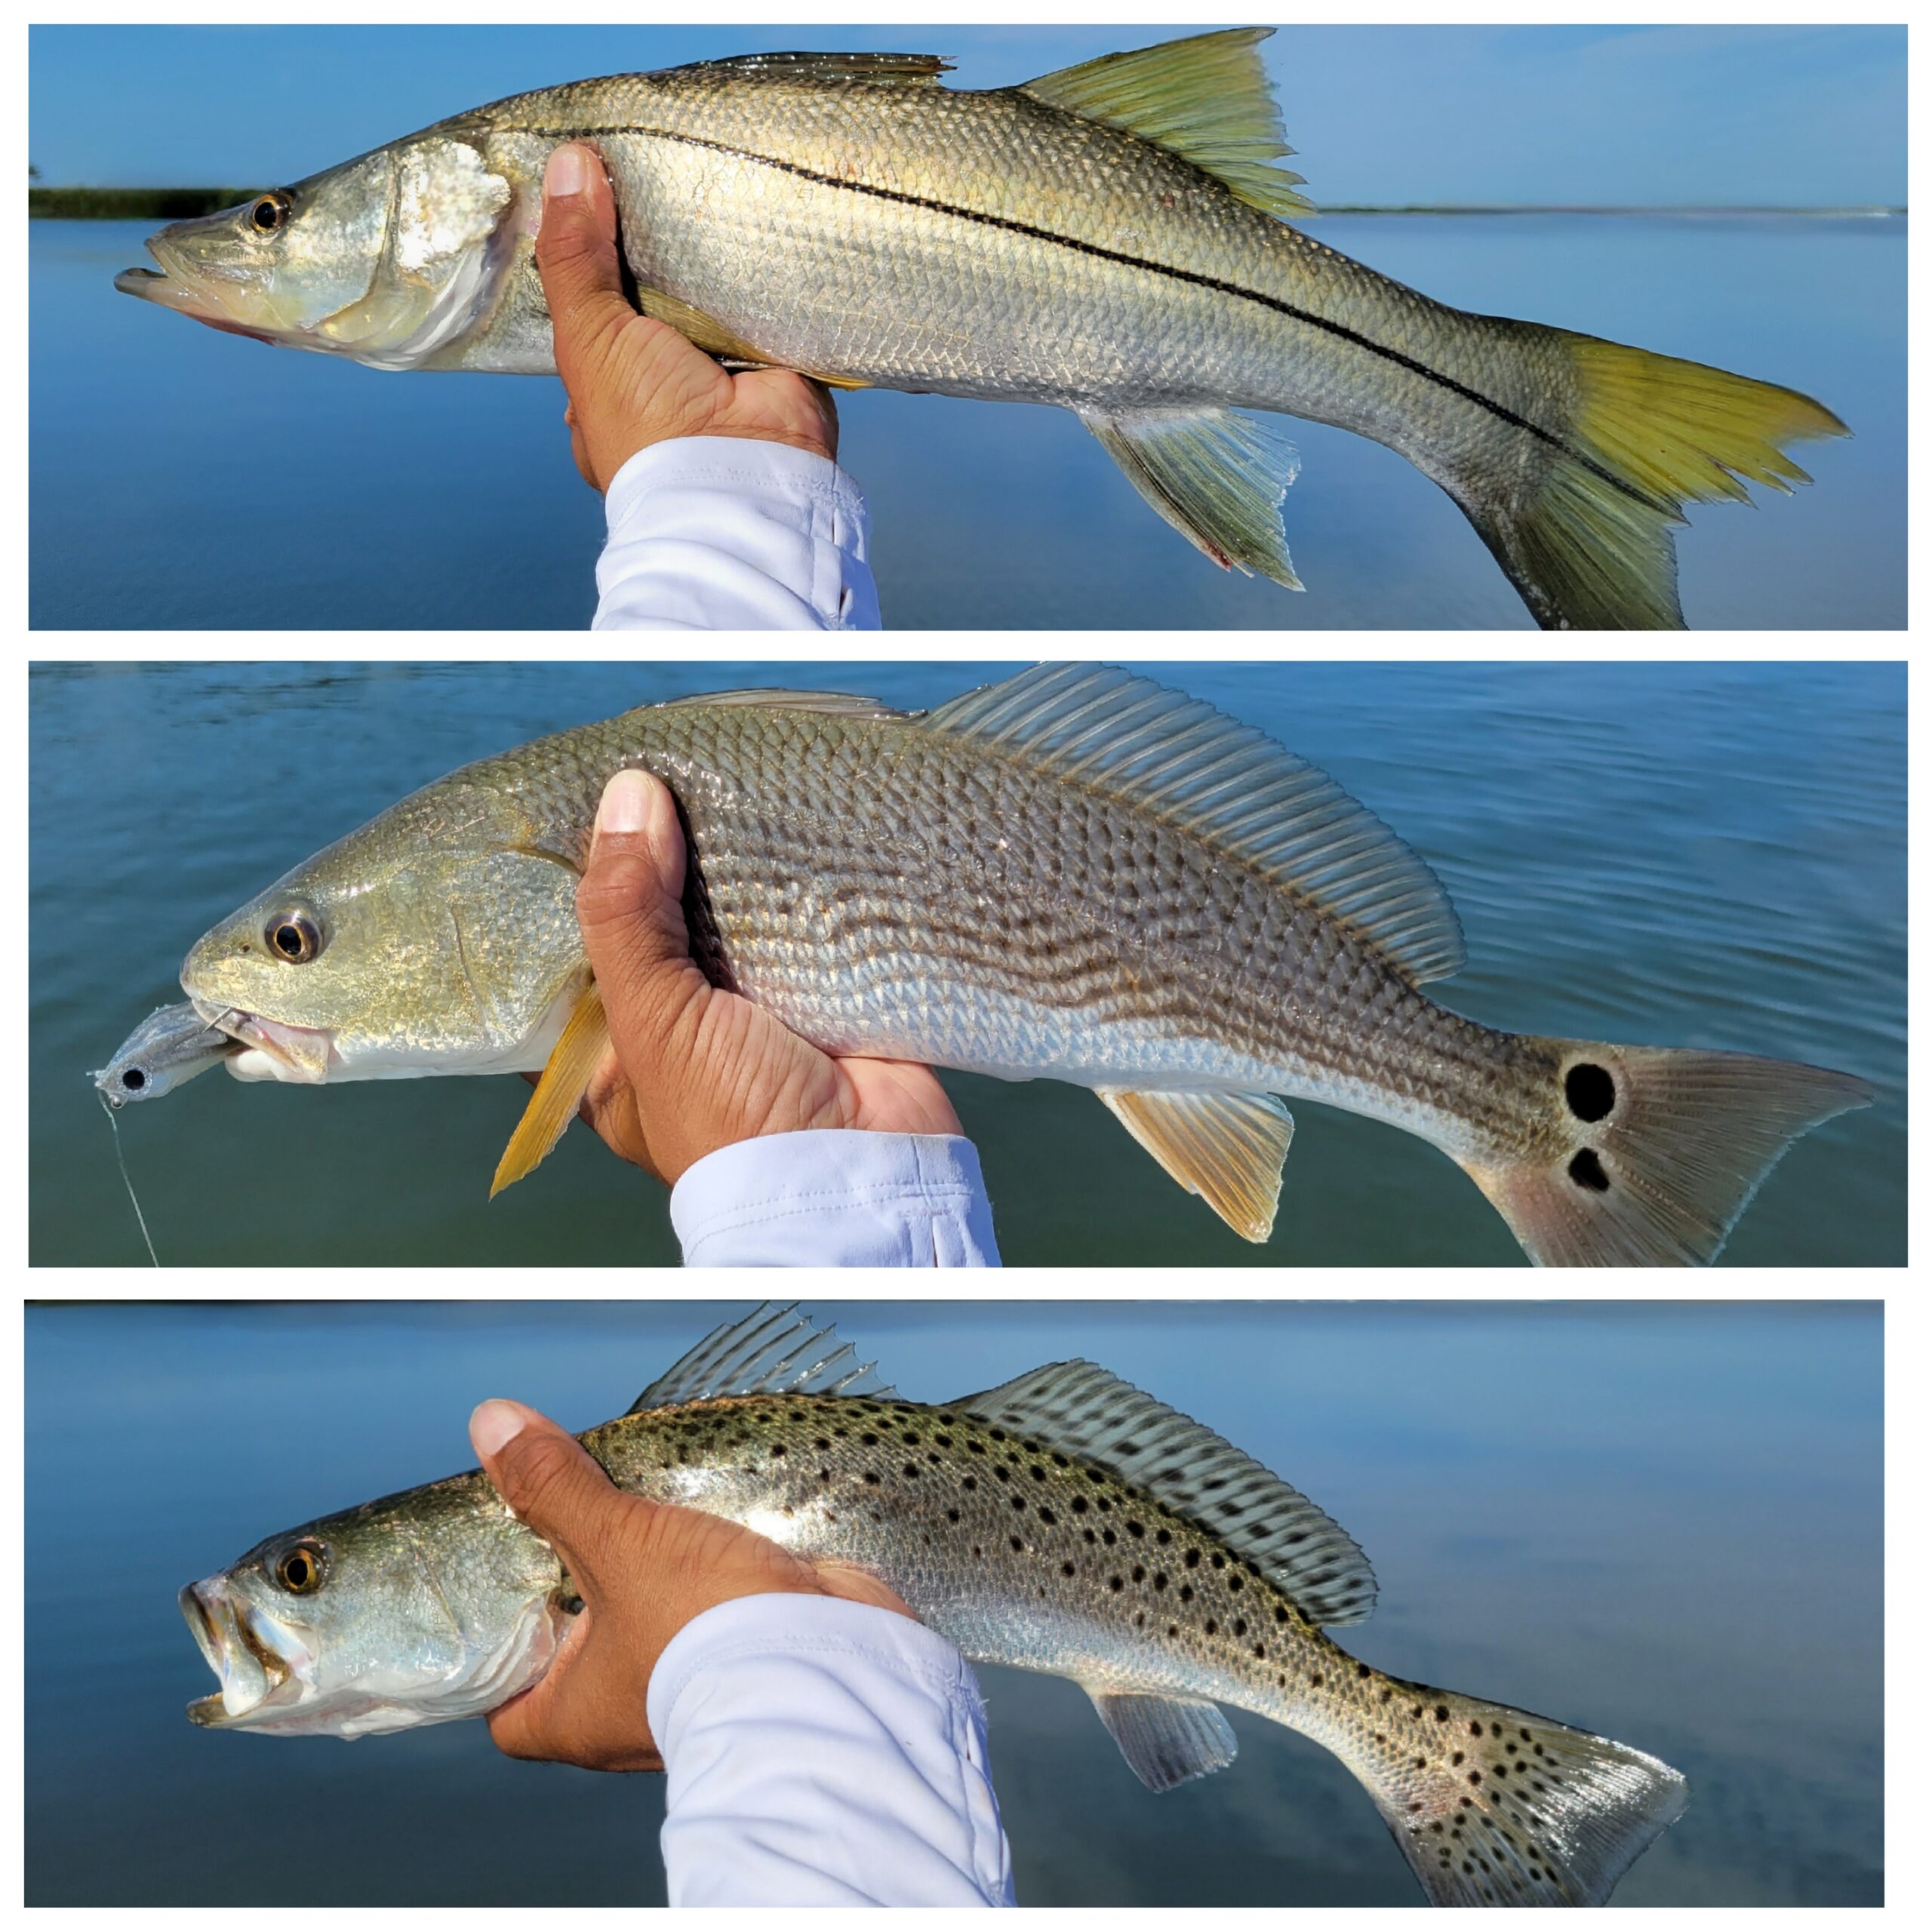 Snook feed on glass minnows near Capt. Joe's Tackle in Fort Pierce.